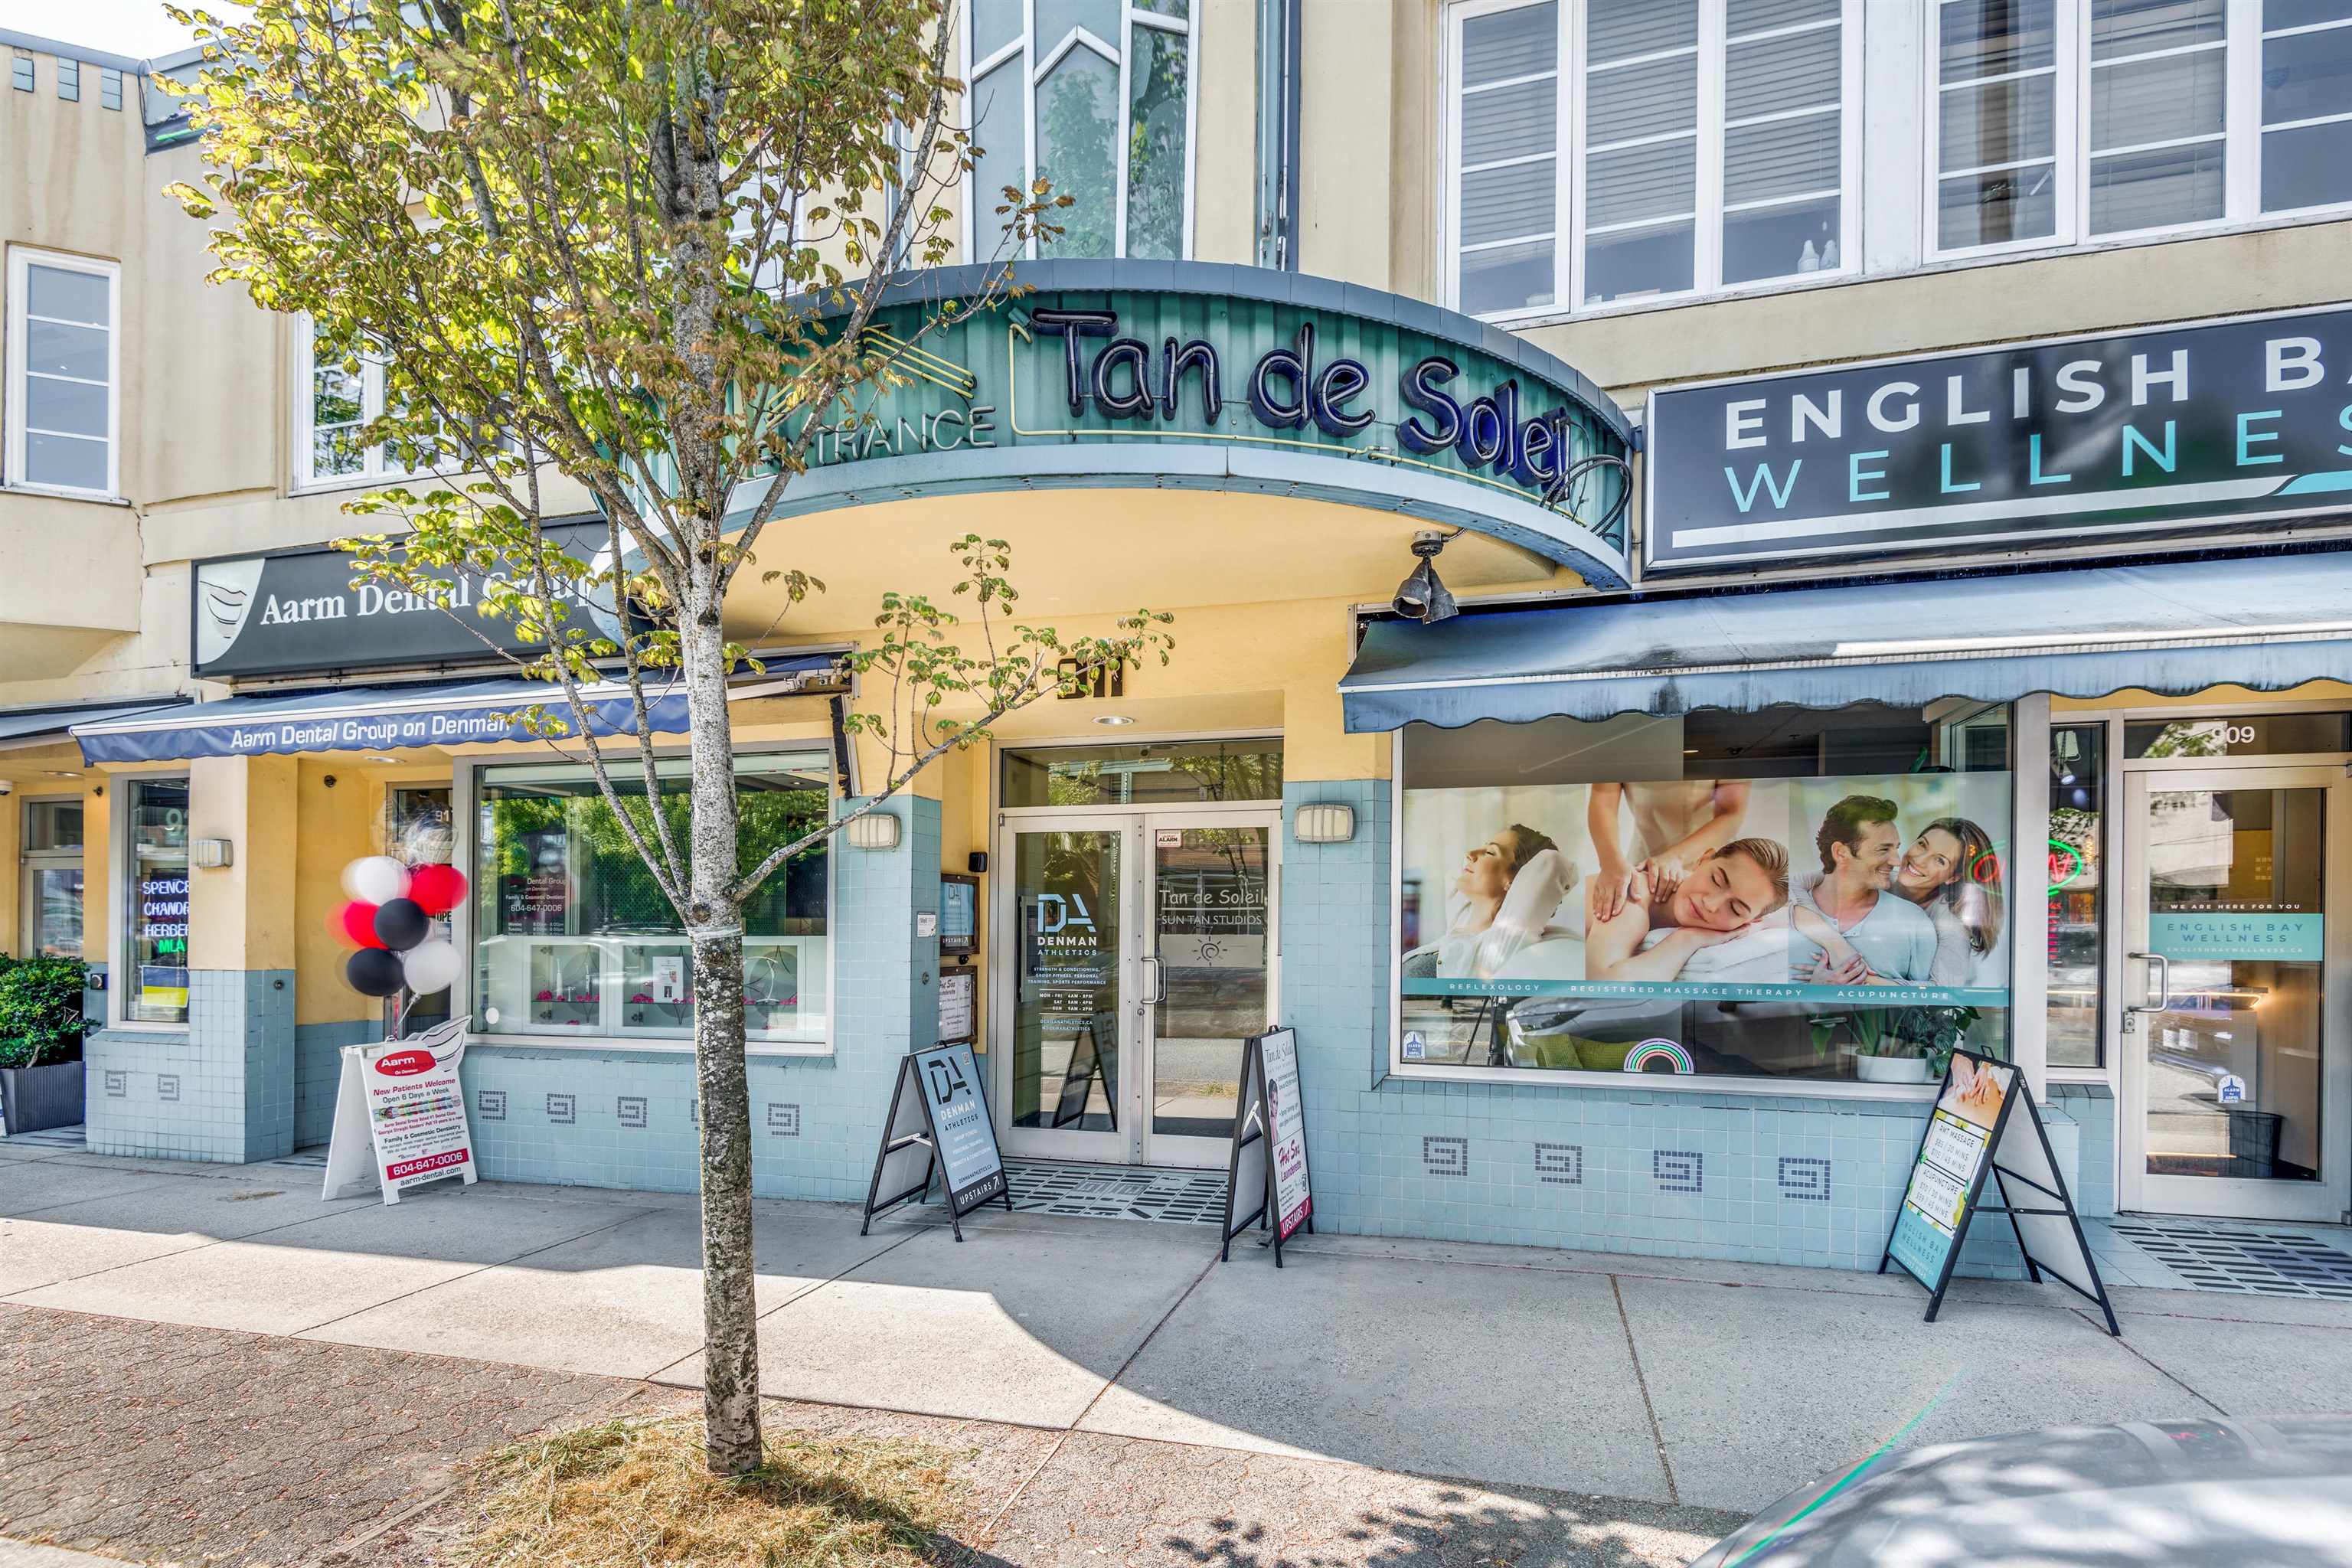 210-911 DENMAN STREET, Vancouver, British Columbia, ,Retail,For Lease,C8051955